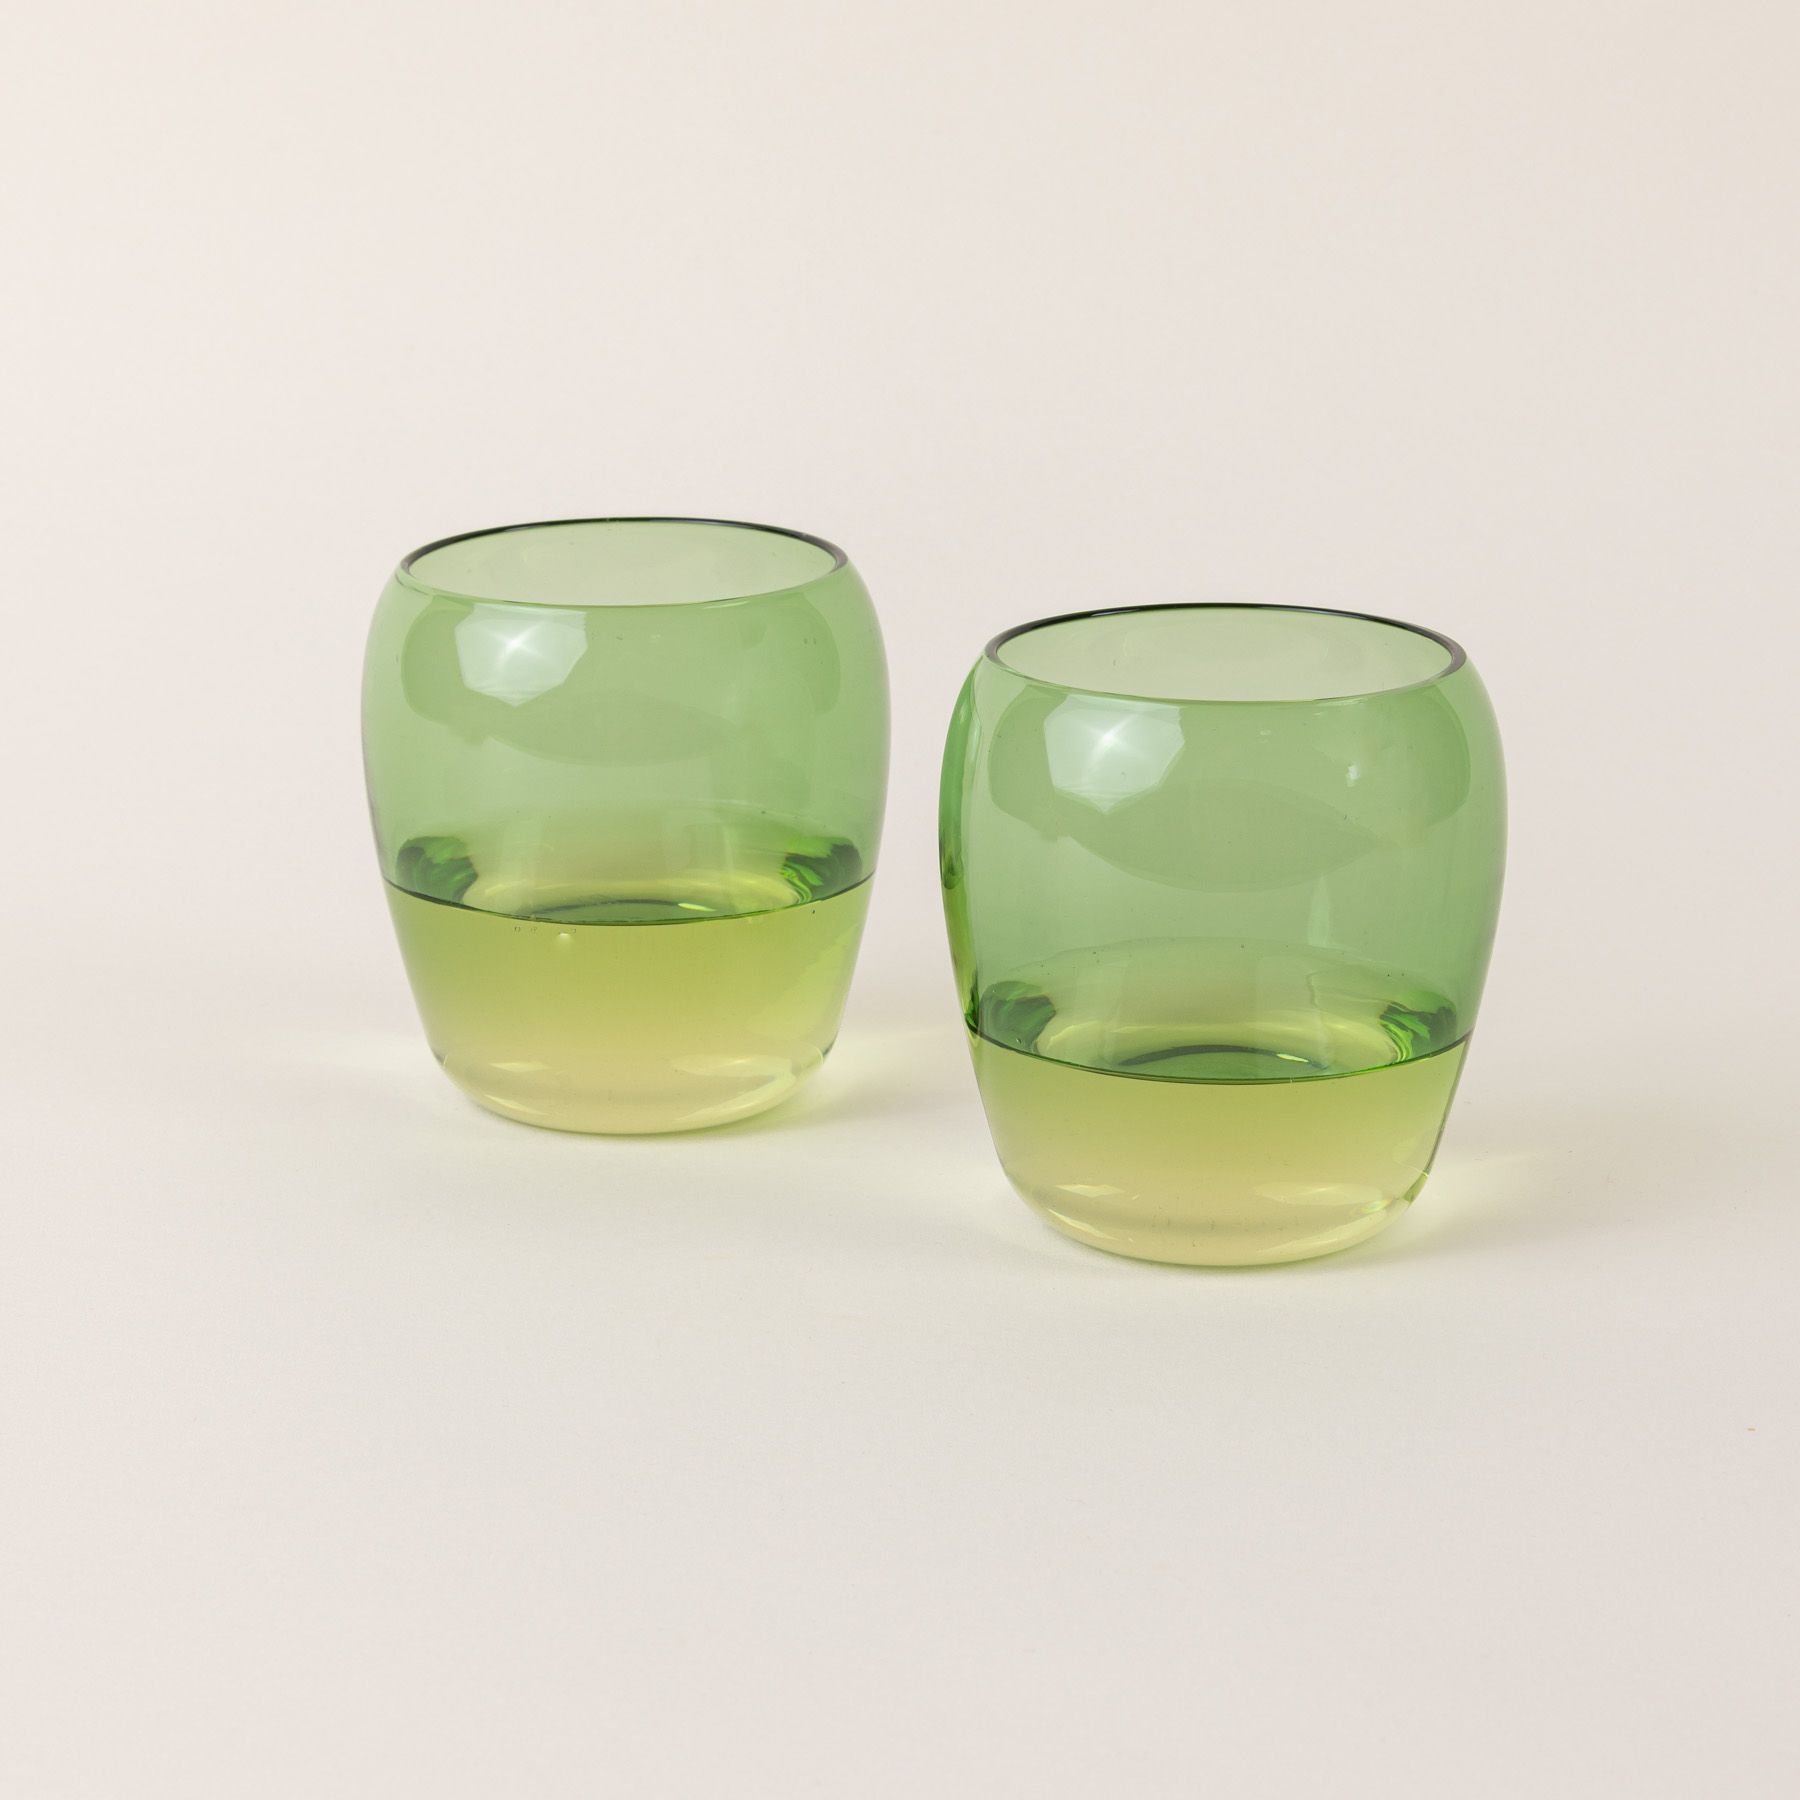 Two short light green glass tumblers with a slight curve inward on the top.